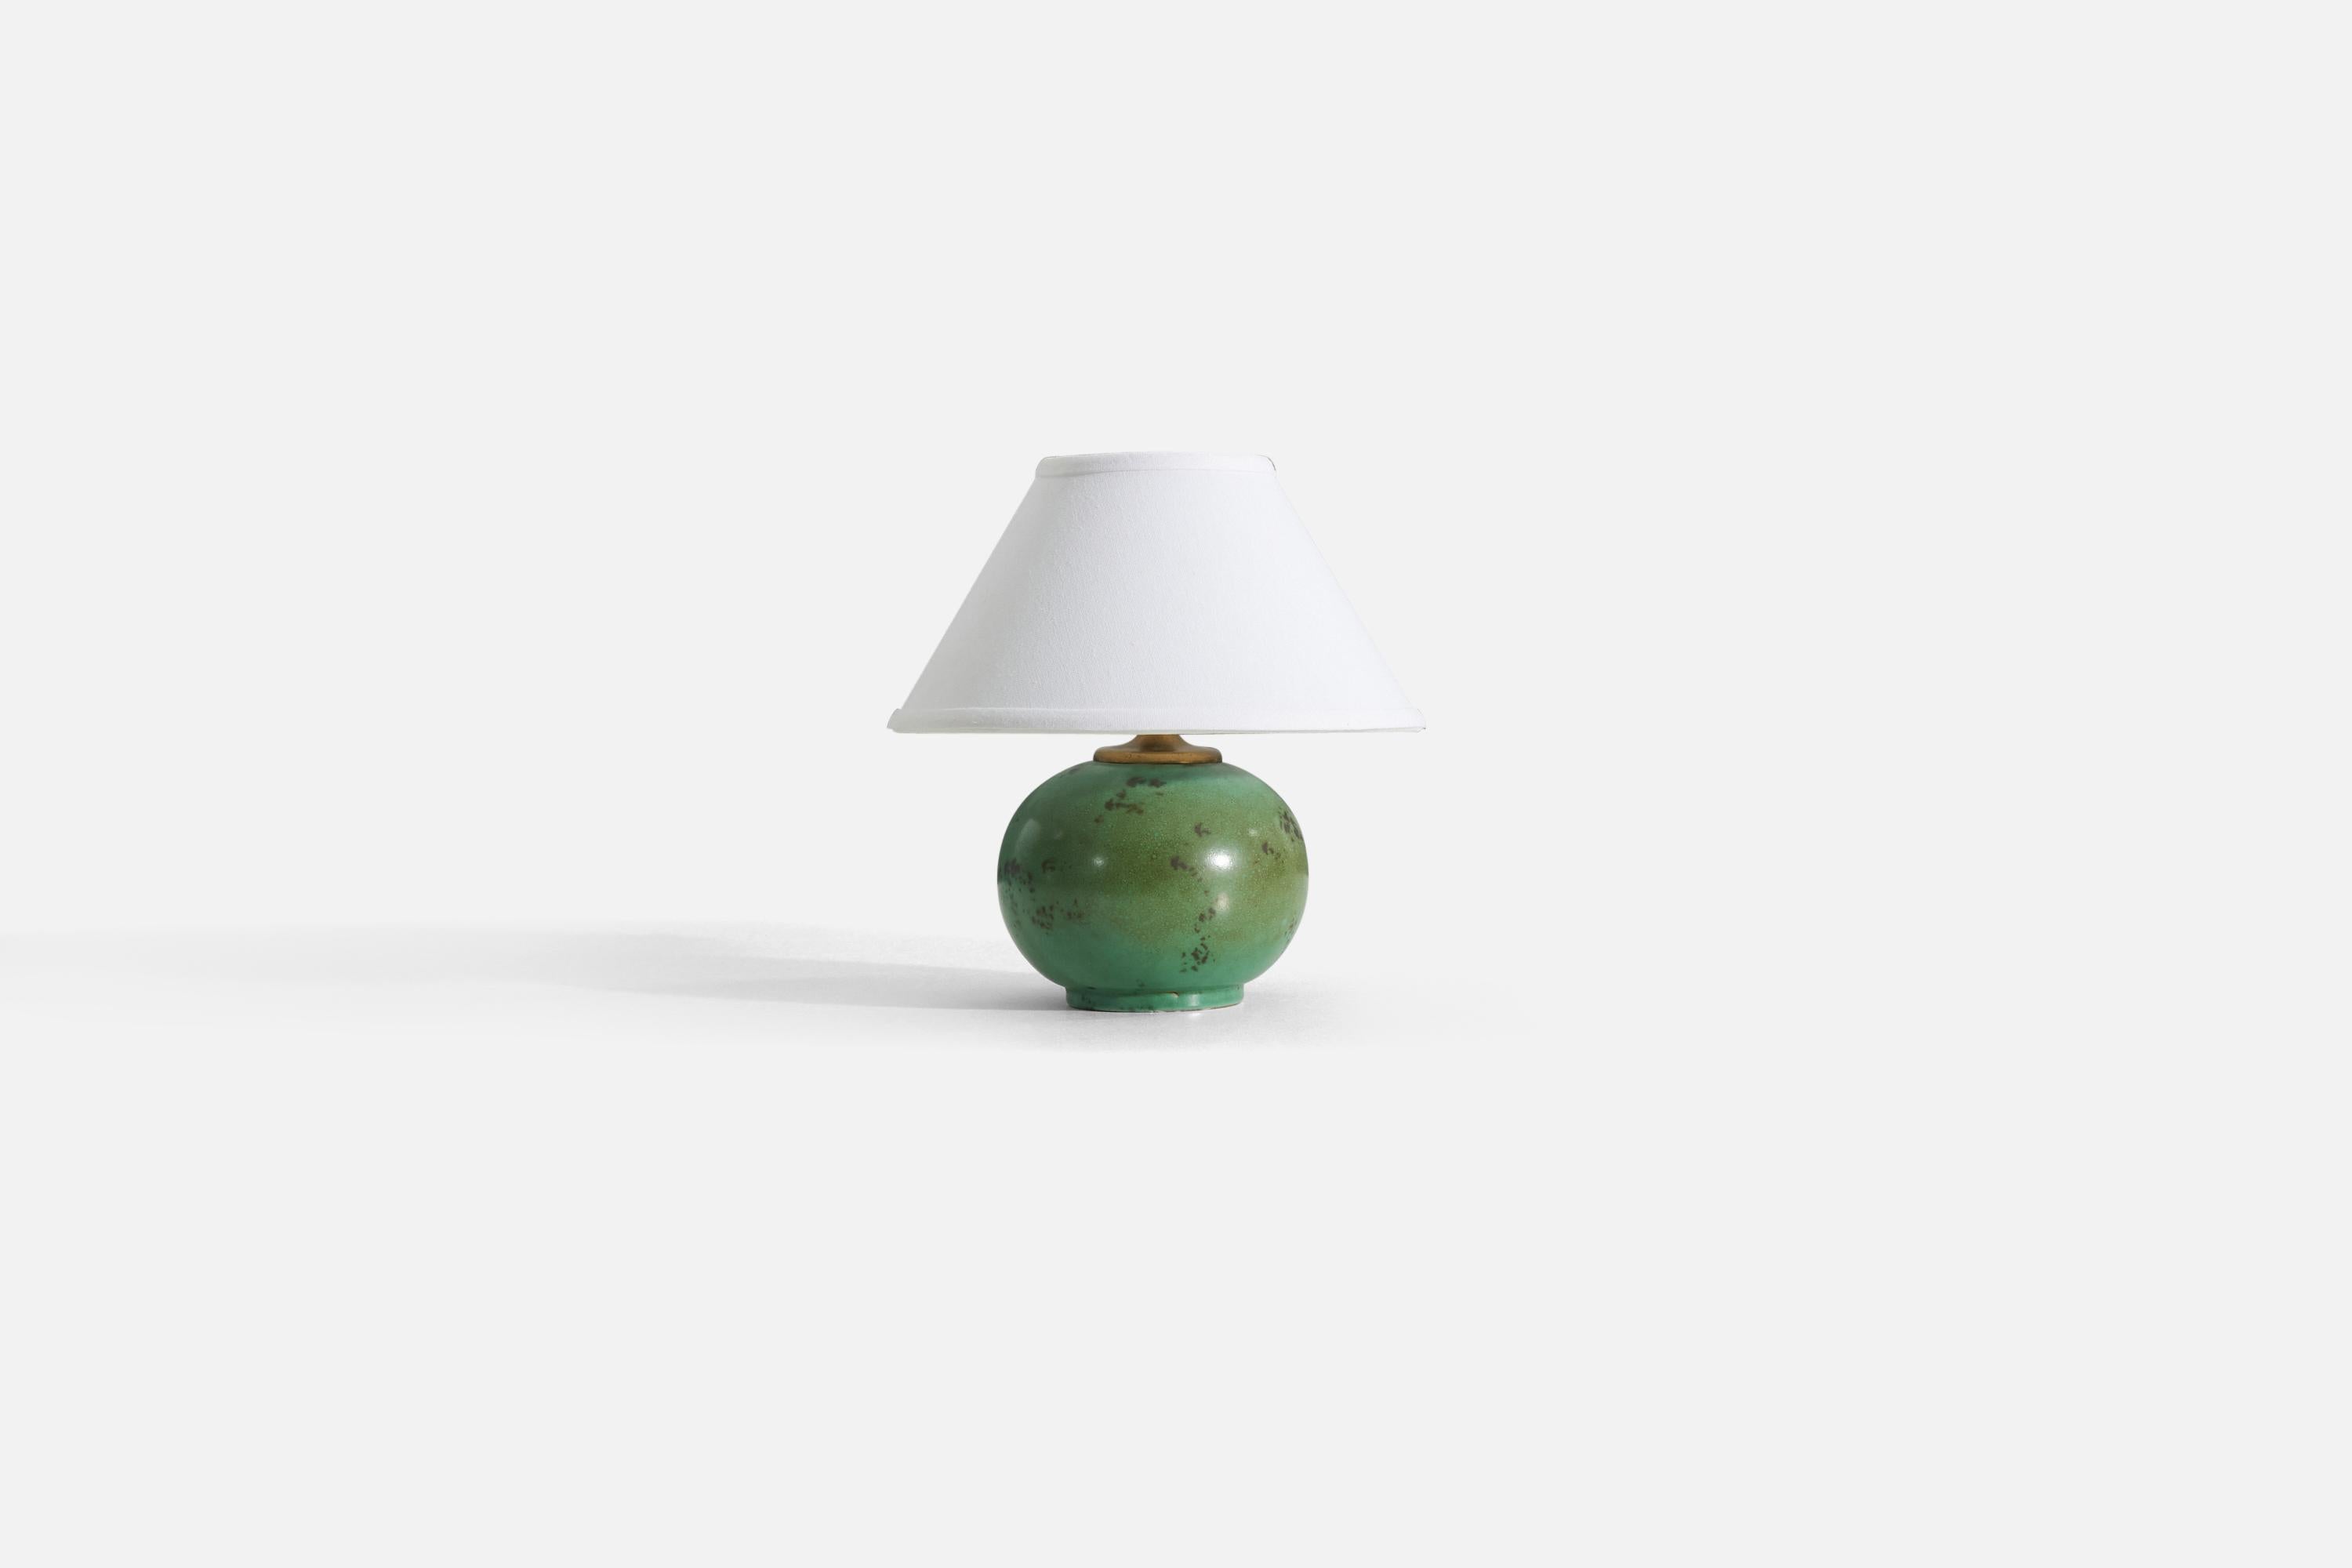 A green-glazed earthenware Modernist table lamp by Upsala-Ekeby, Sweden, 1930s.

Measurements listed are of lamp. Sold without lampshade.

For reference

Shade : 4.5 x 10.25 x 6
Lamp with shade : 10.5 x 10.25 x 10.25.